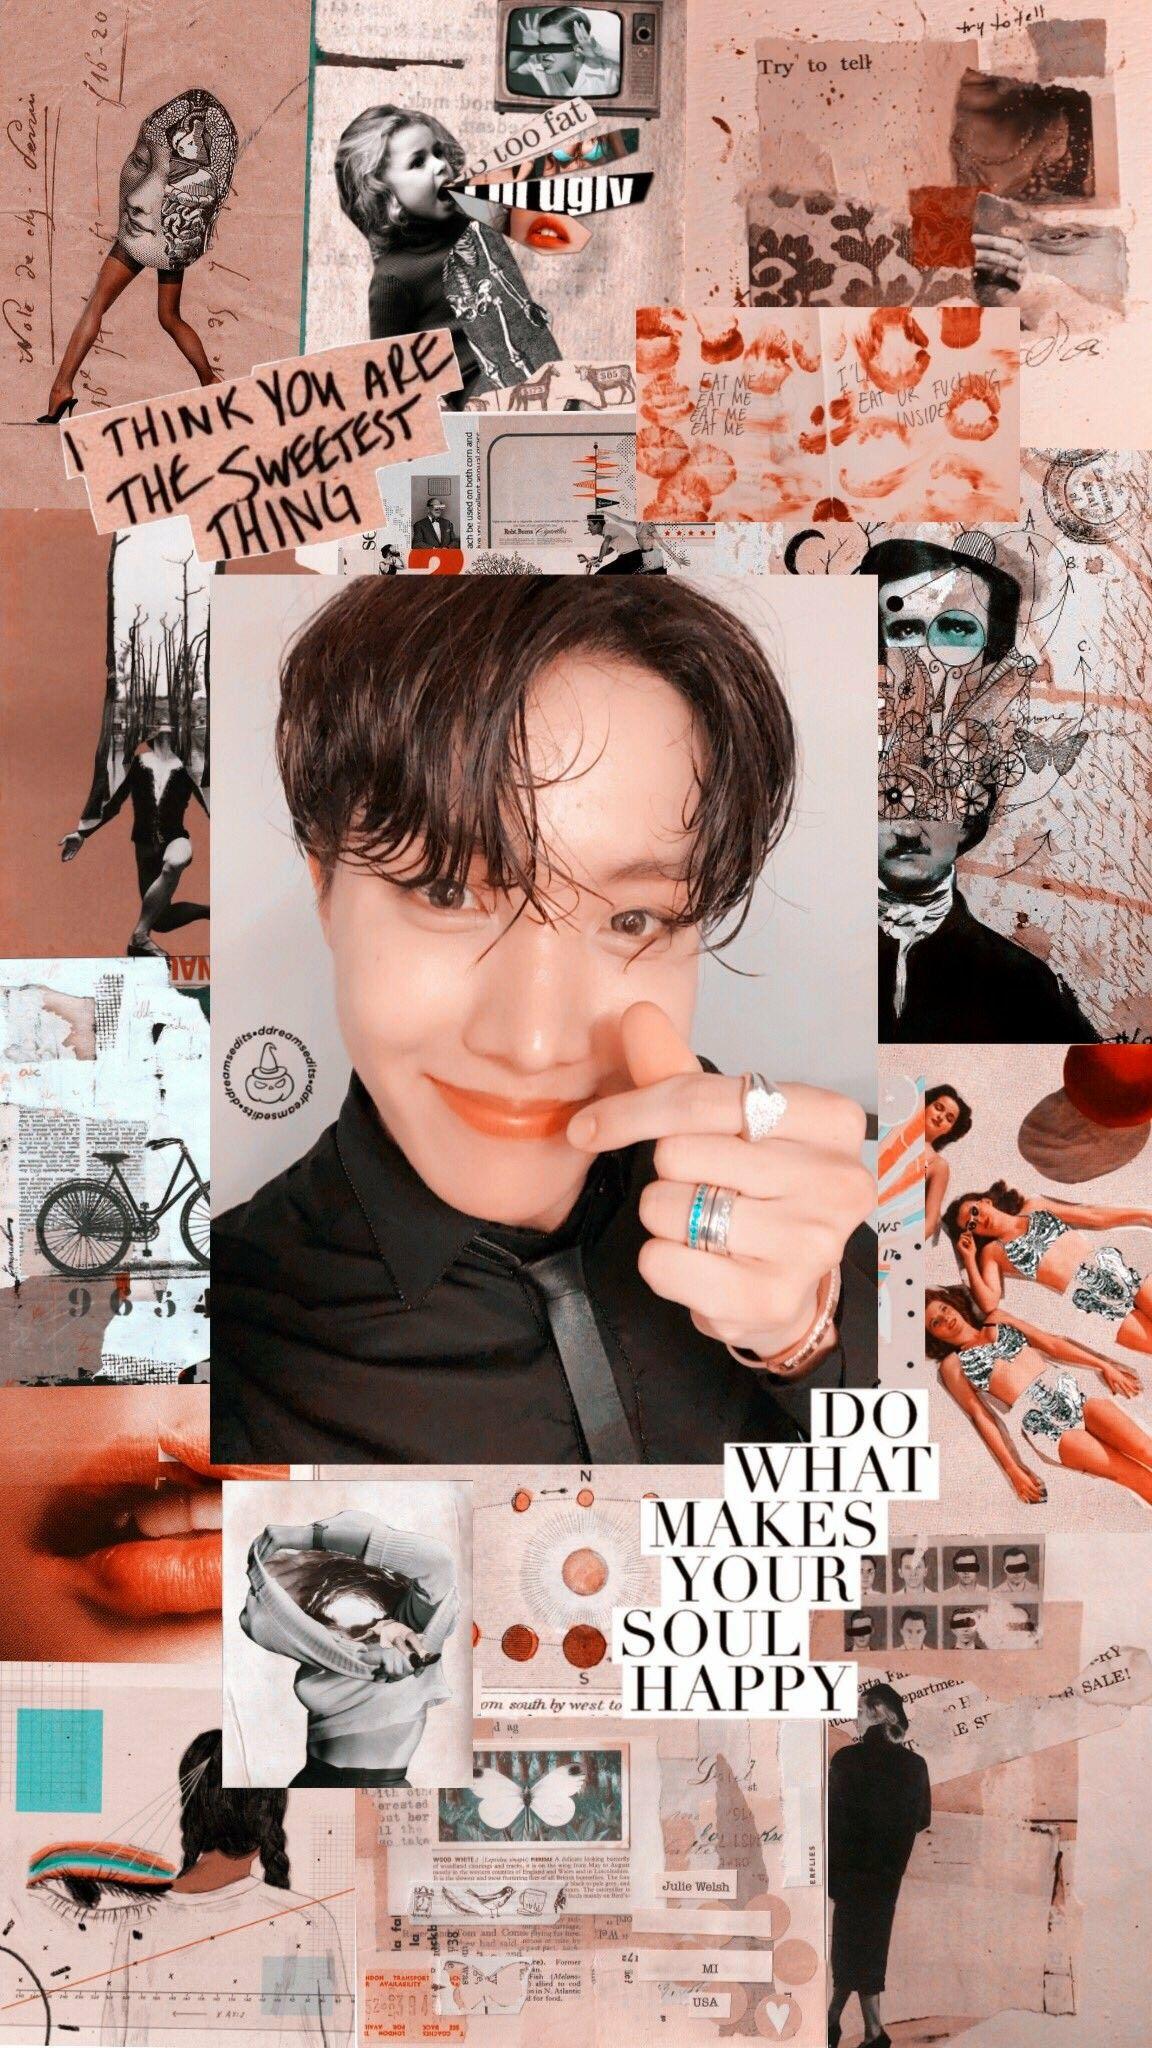 Jhope Aesthetic Wallpaper Credits To Twitter Ddreamsedits